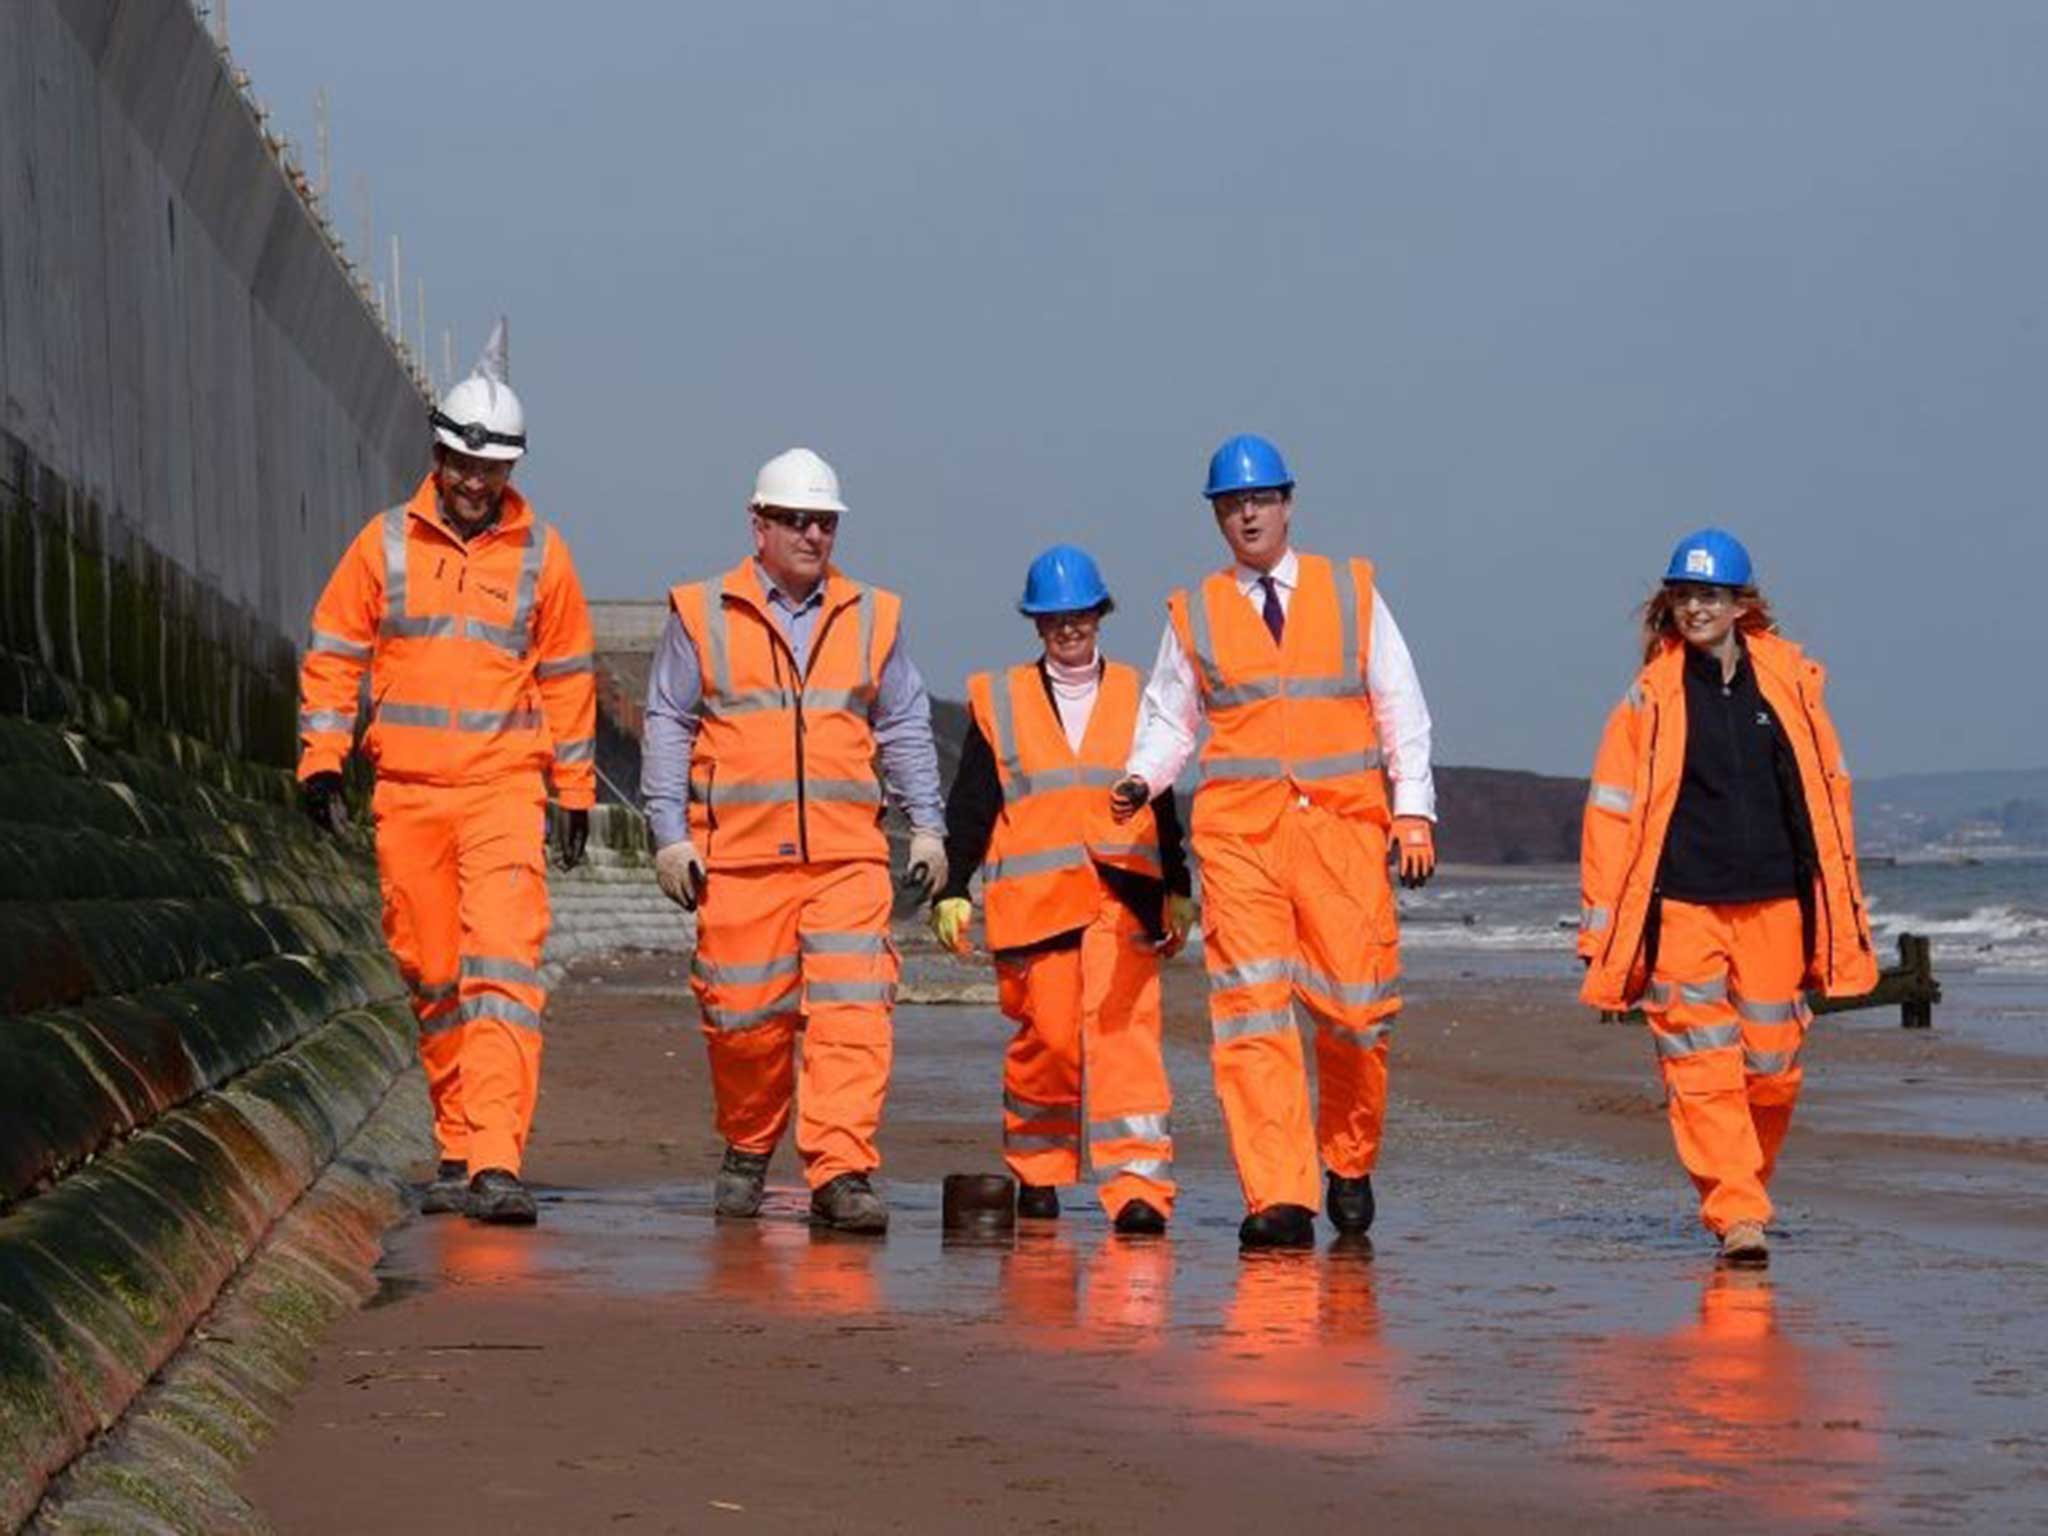 Prime Minister David Cameron meets construction workers at Dawlish in Devon where saw work on the improved sea defences